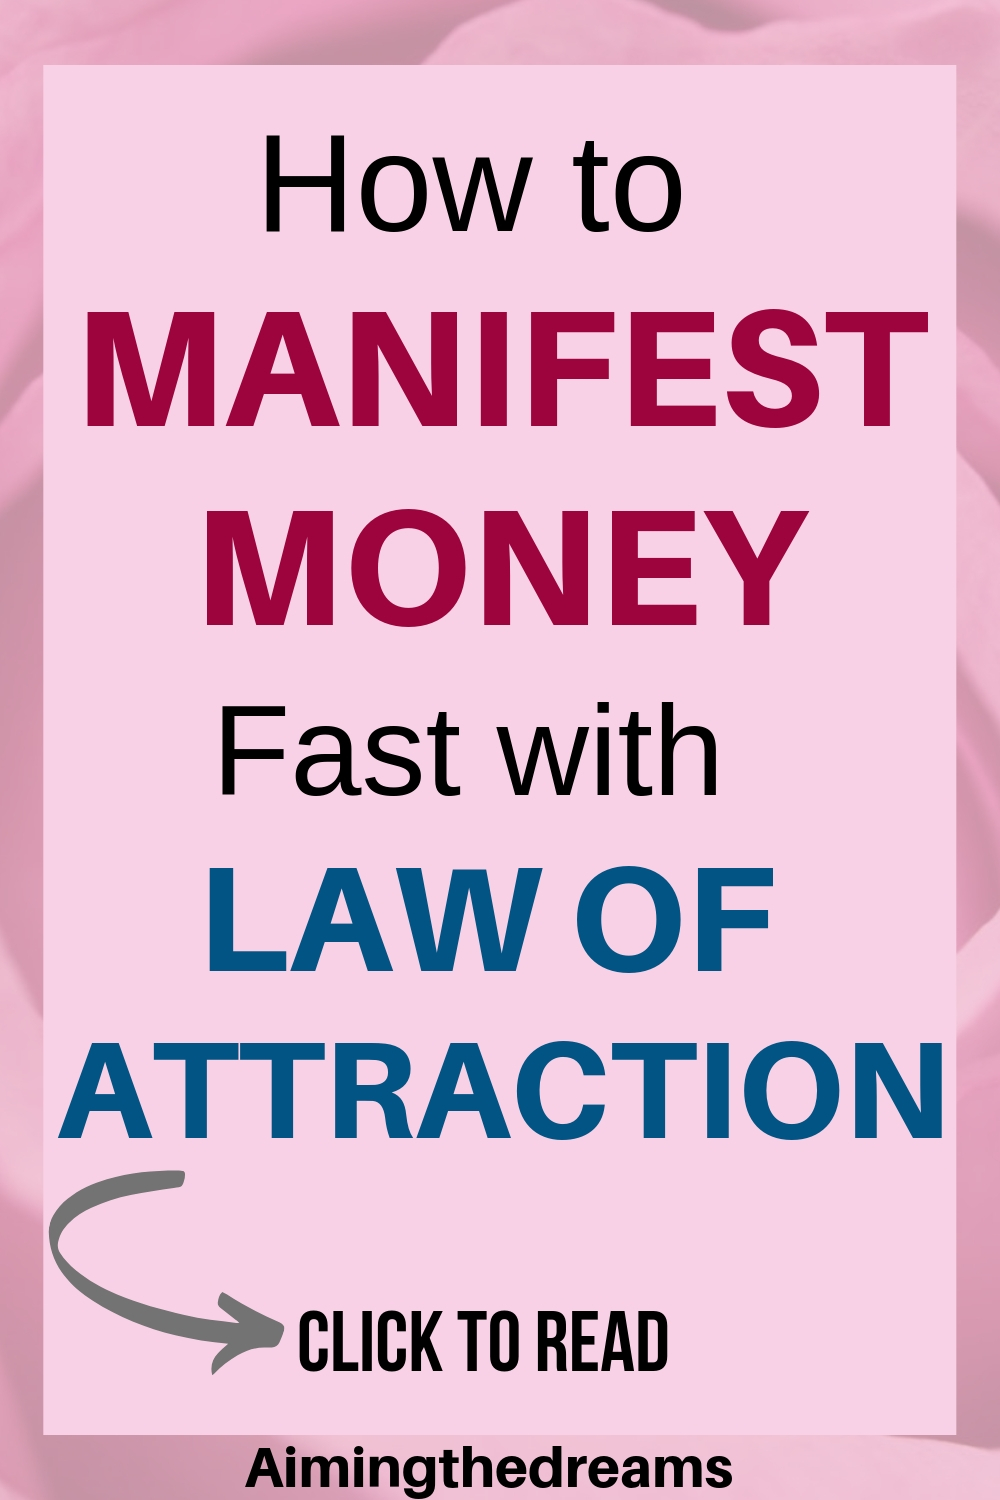 How to manifest money with law of attraction. Universe let you feel the vibrations you need for abundance.